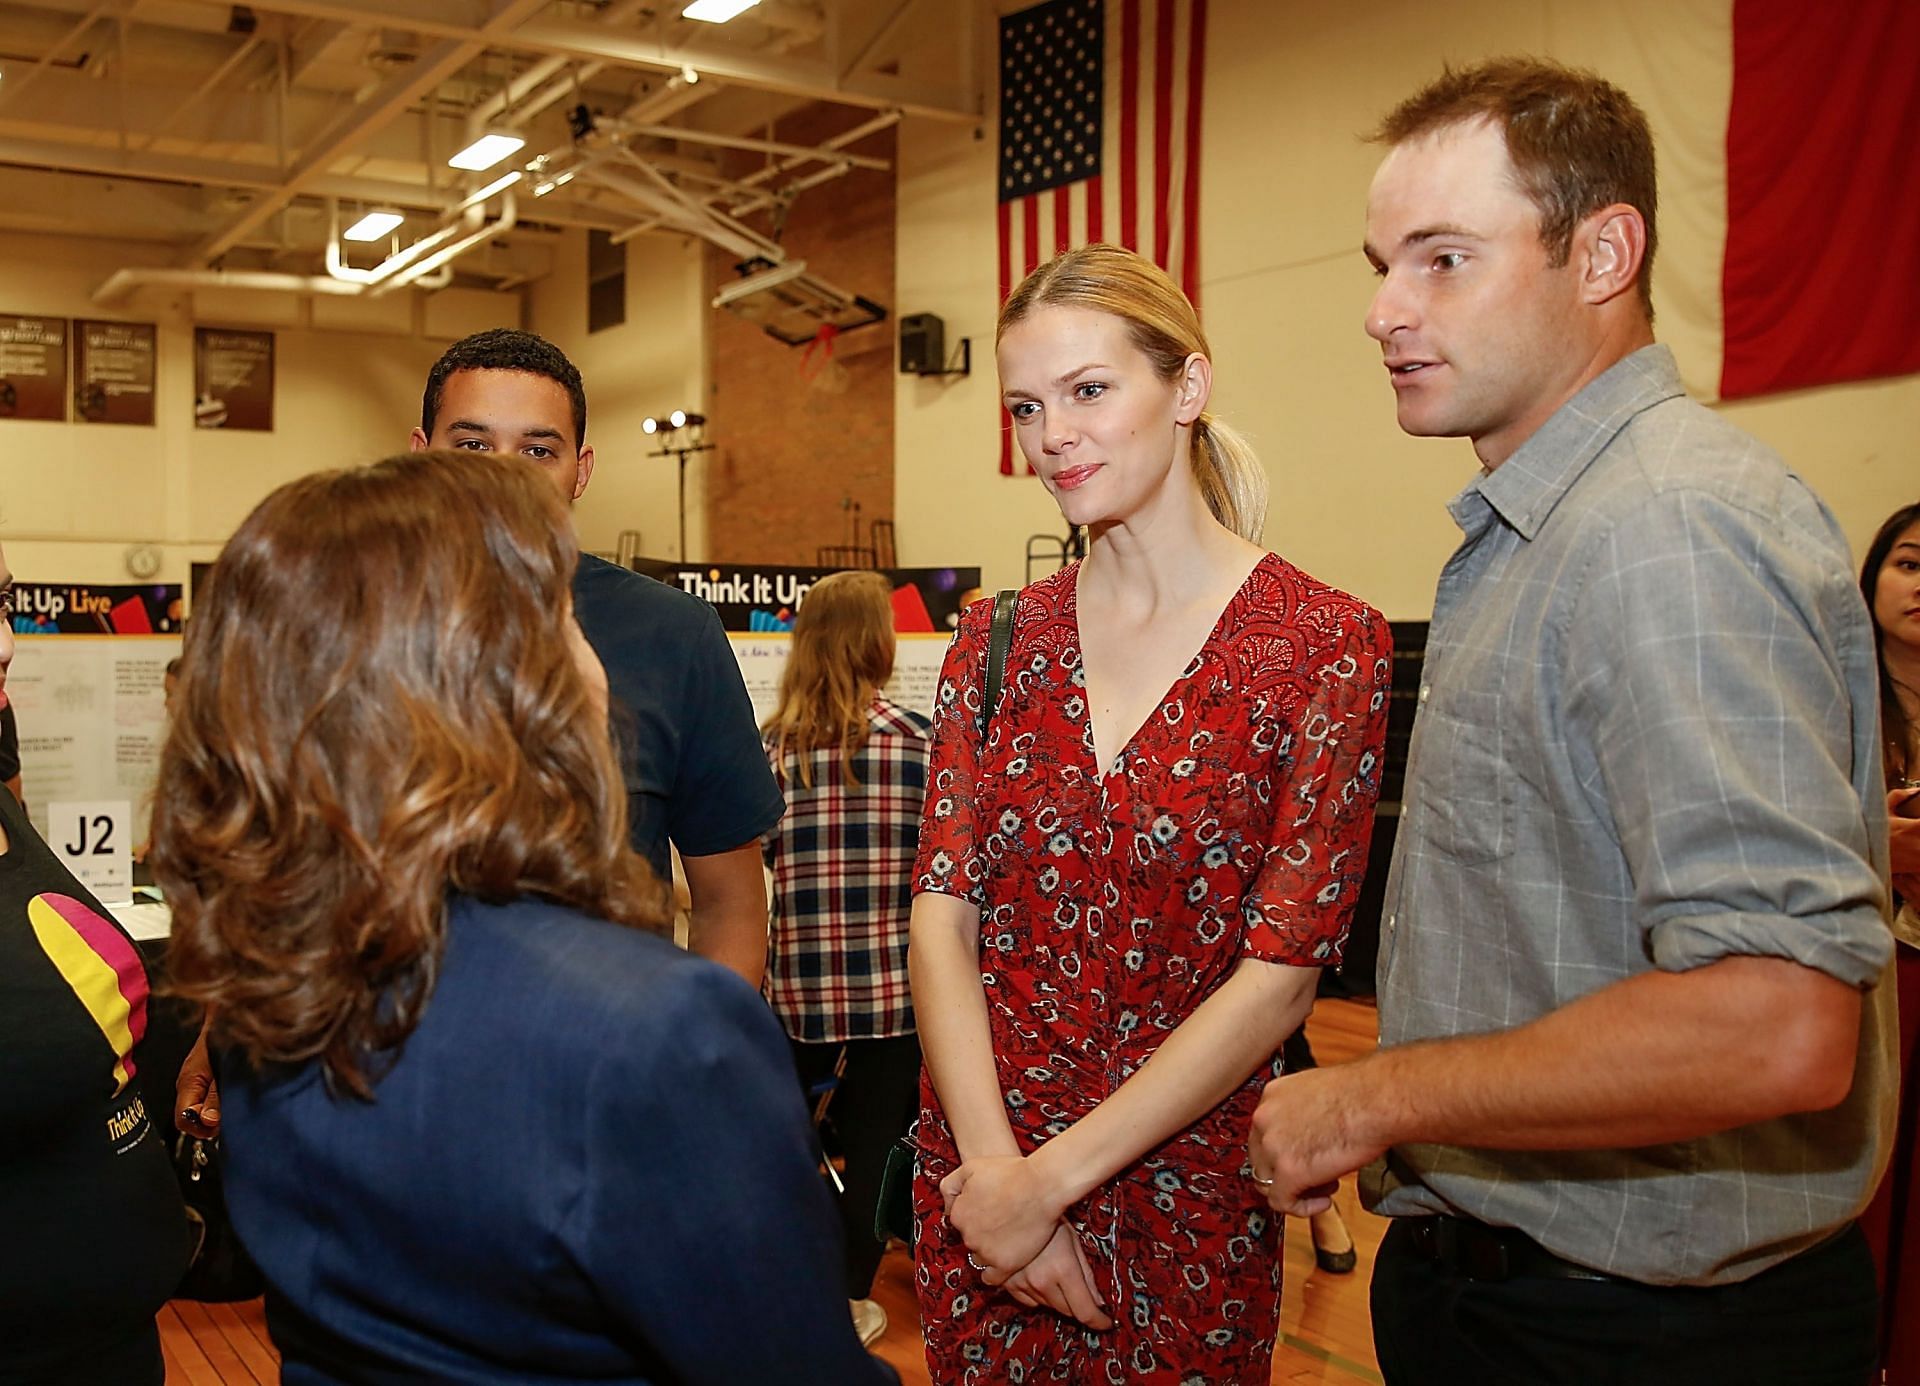 Andy Roddick and Brooklyn Decker at an event in Austin, Texas